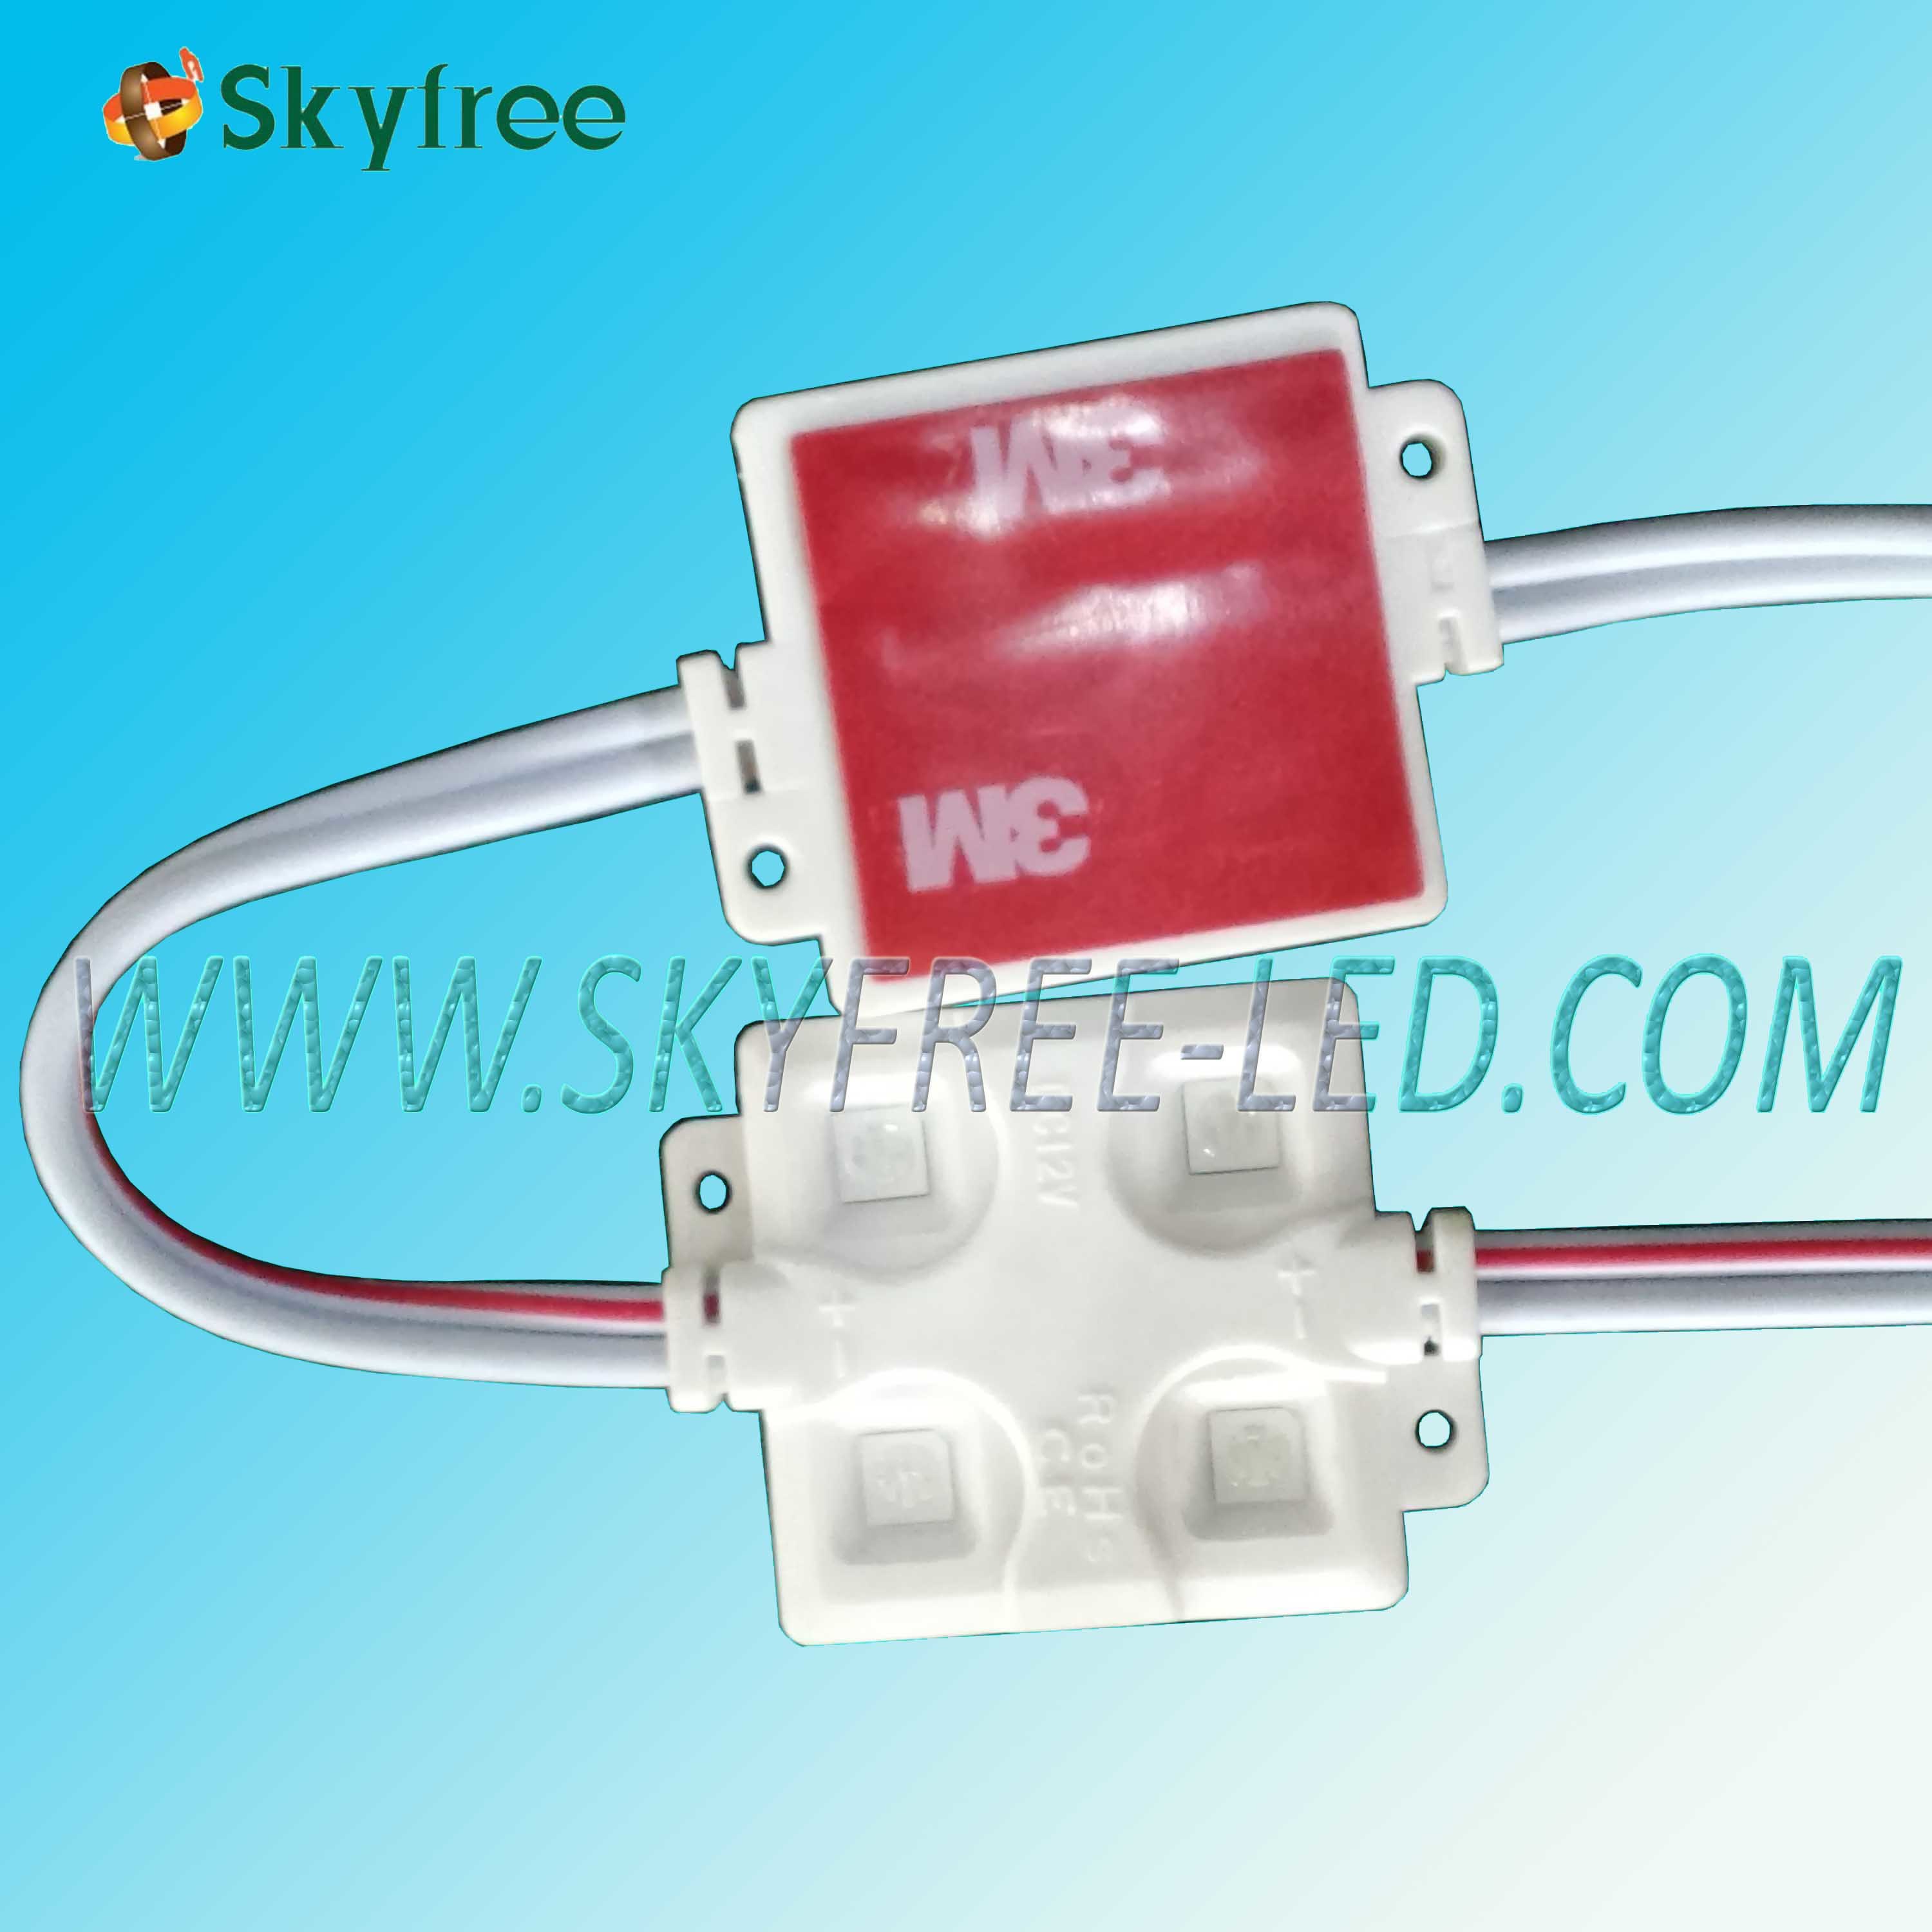 High-Efficiency, Energy-Saving and Consistent LED Module Light (SF-LM5050G04-F)